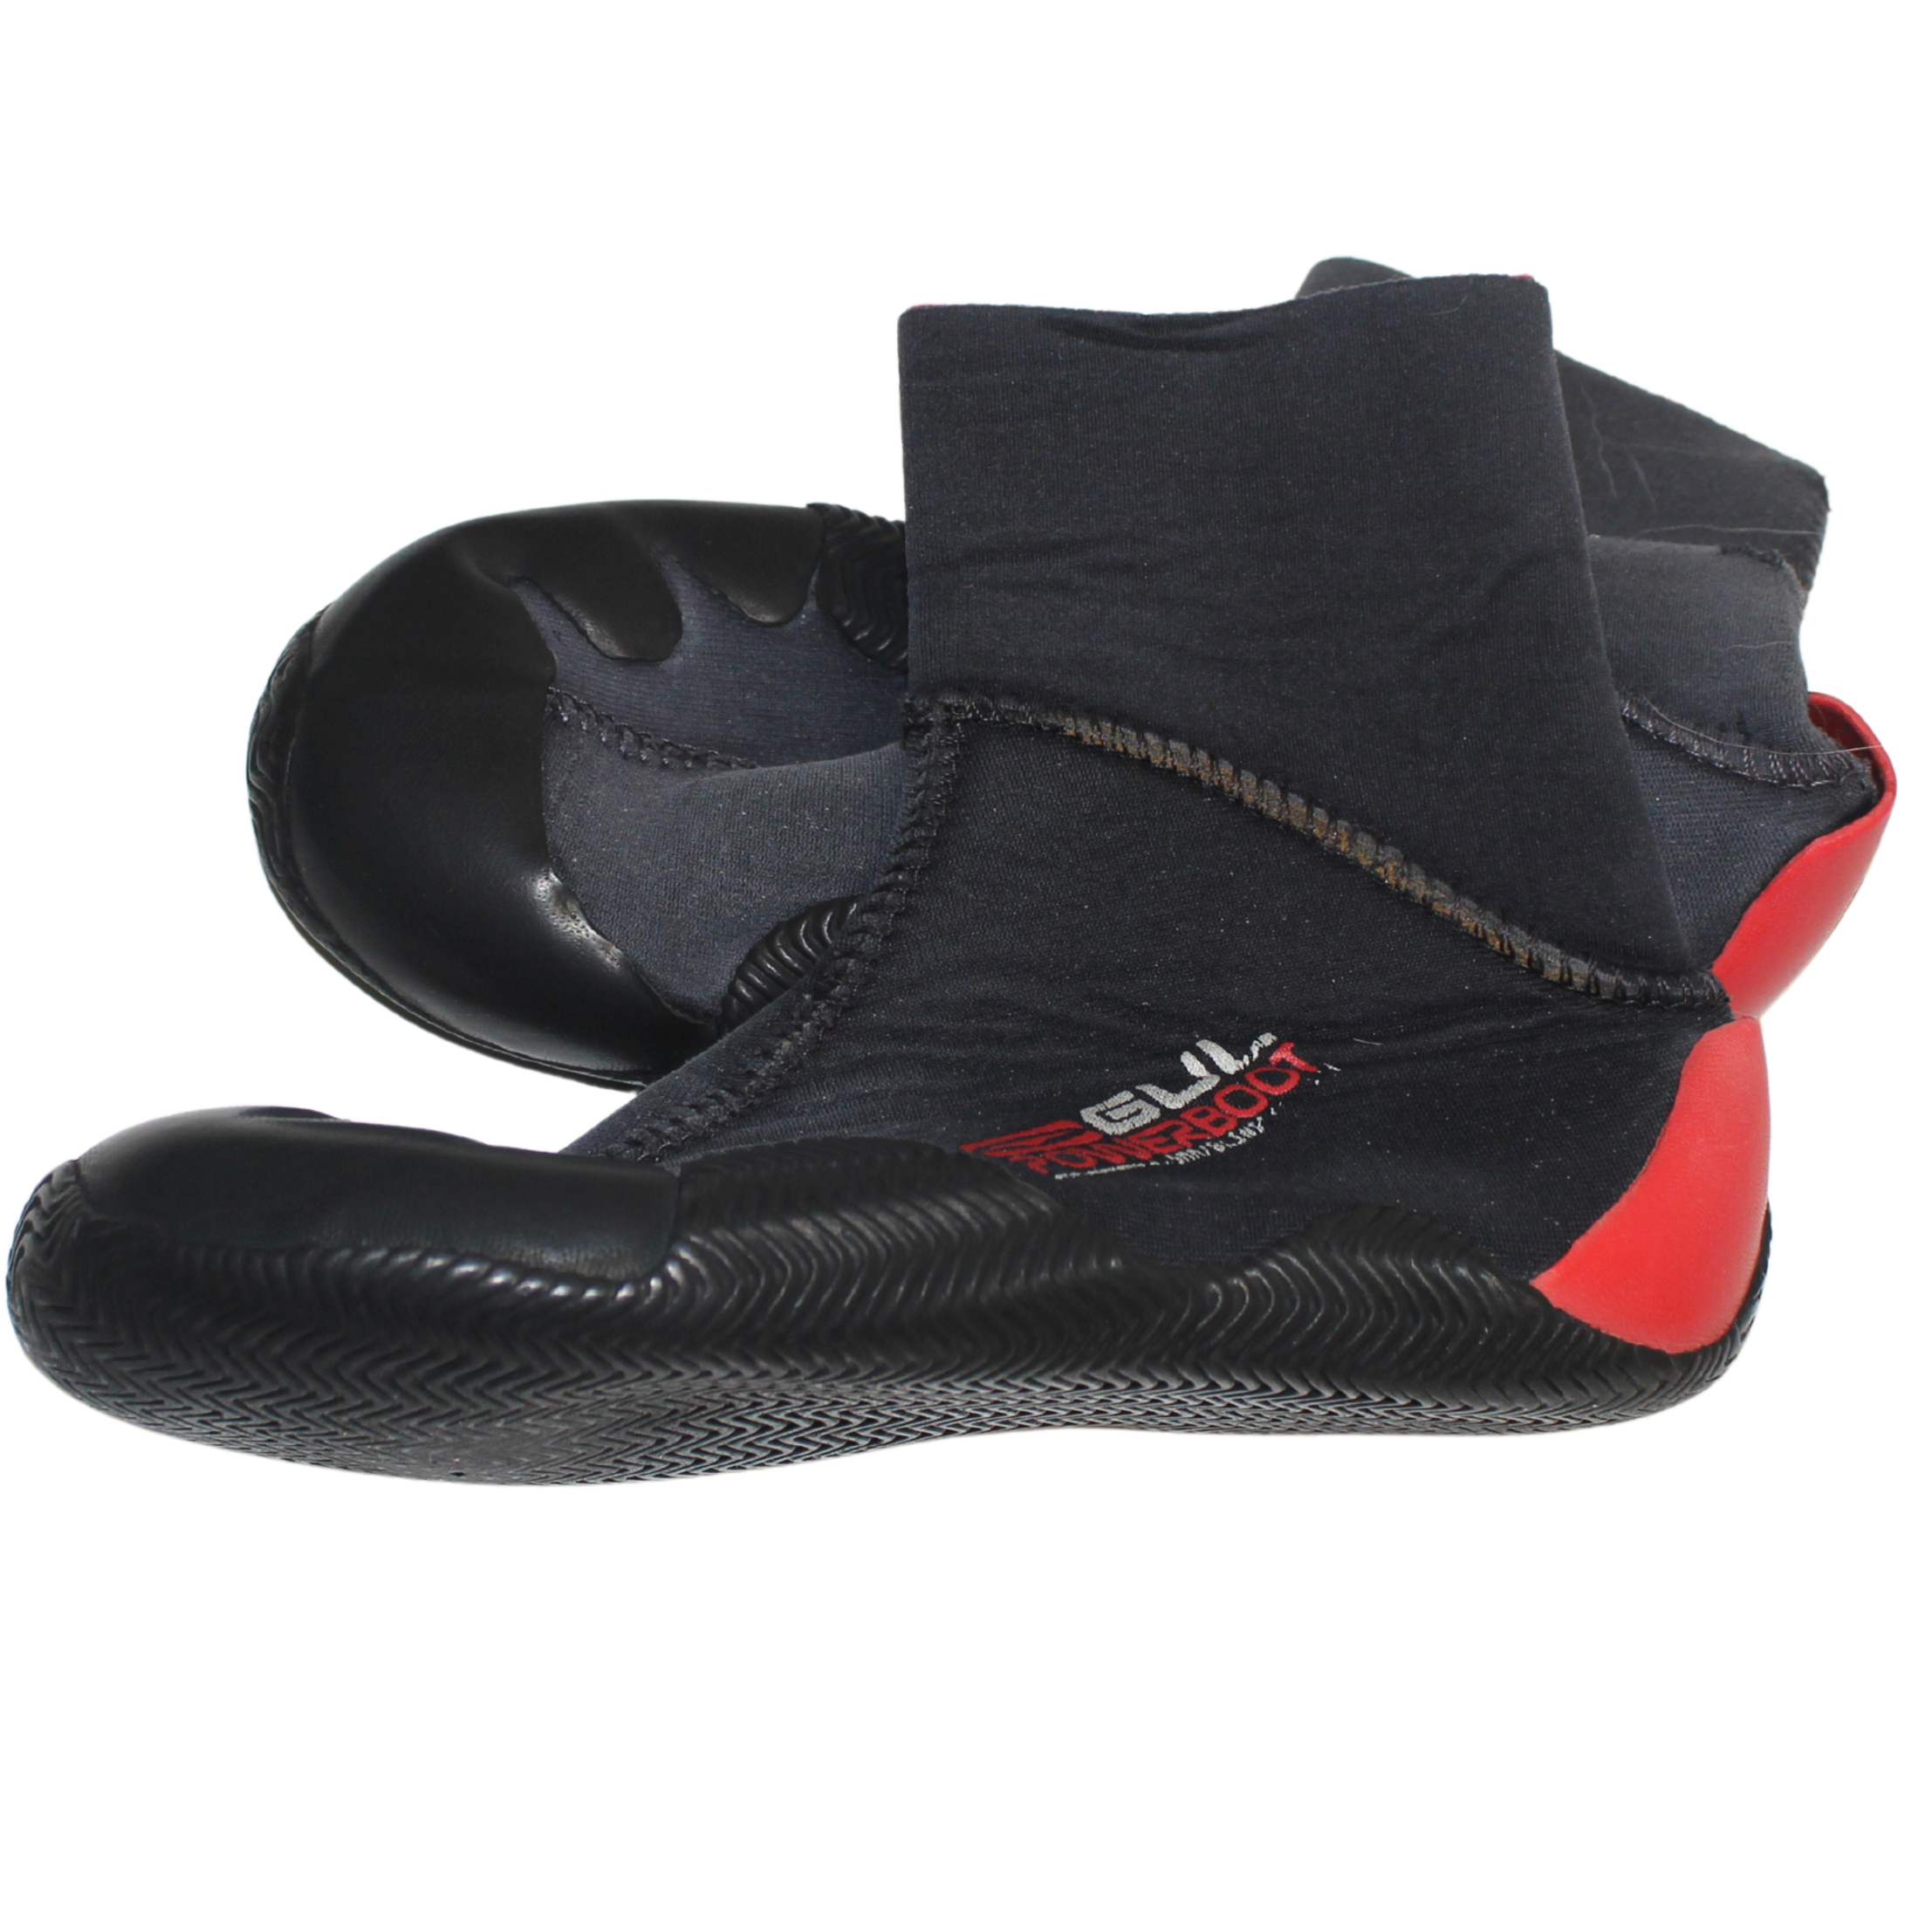 Powerboot Surf Shoes